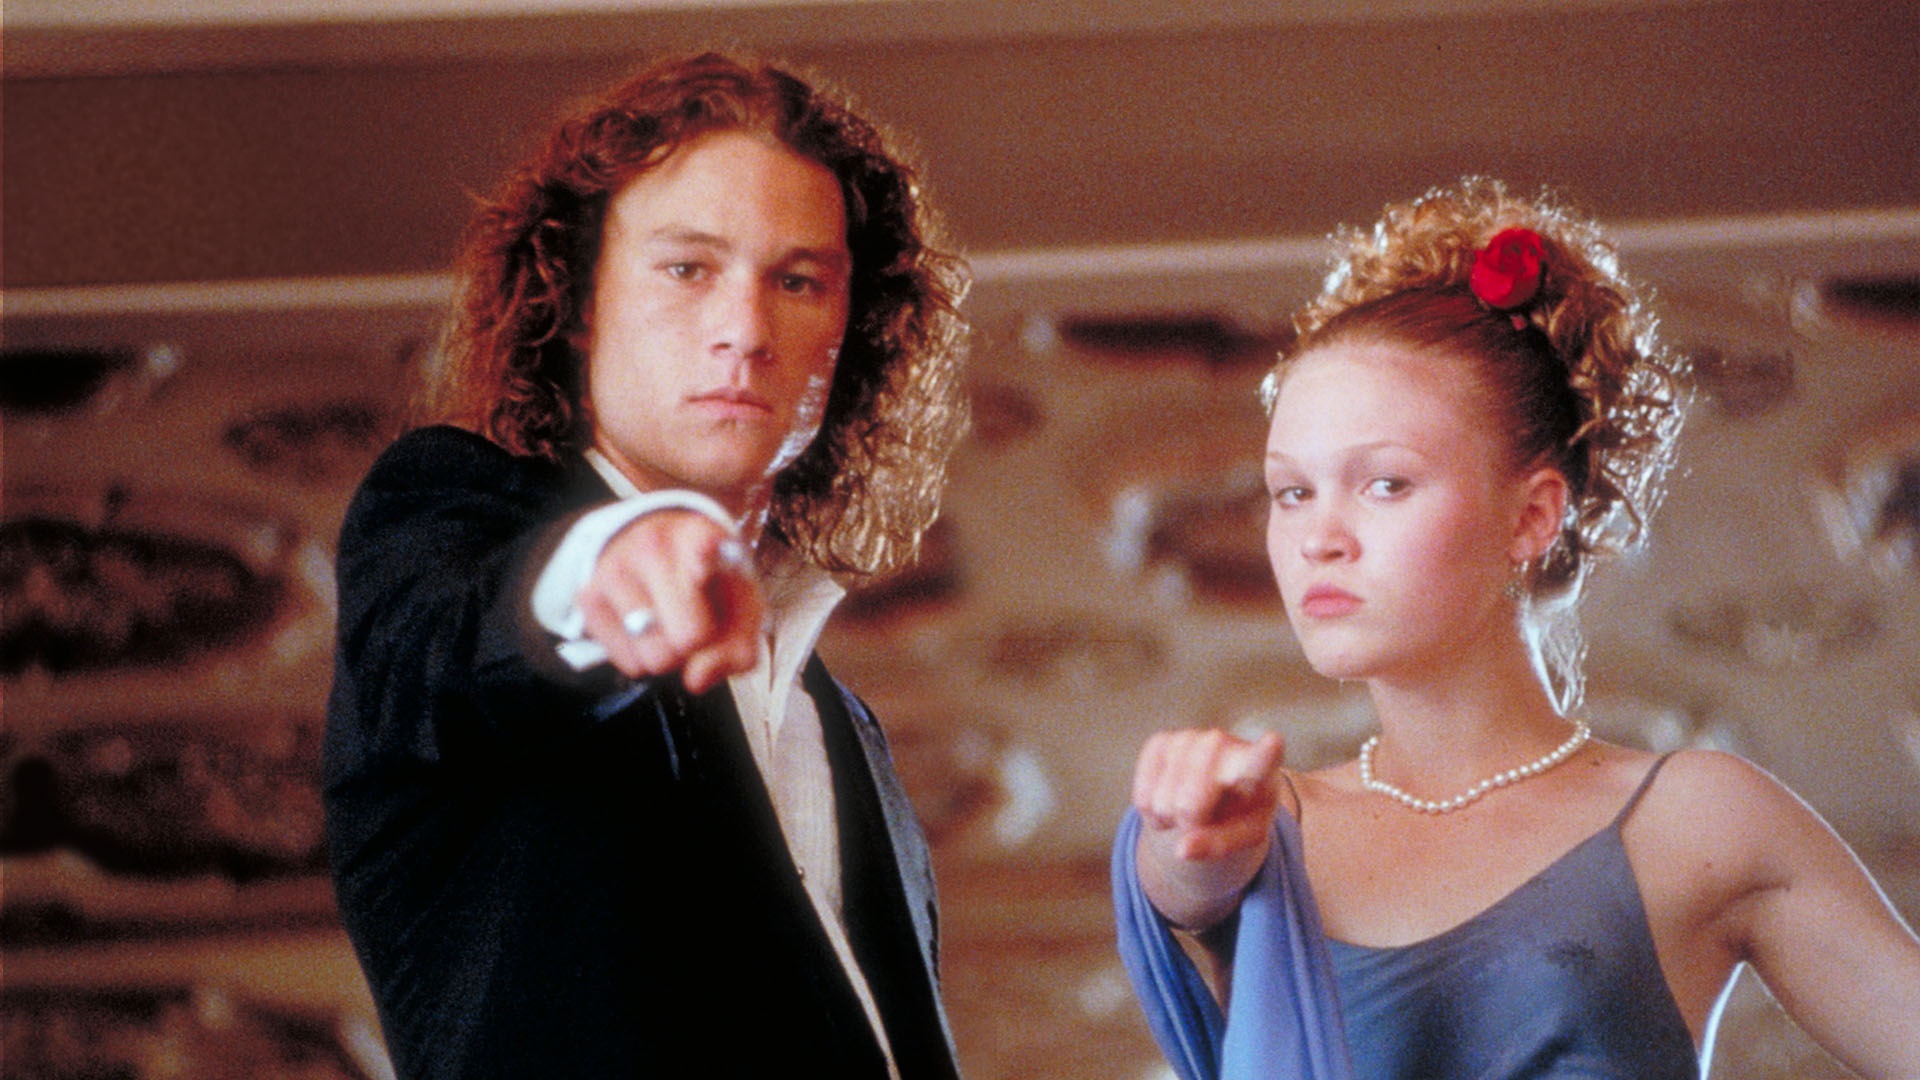 Romance movies - 10 things i hate about you movie still